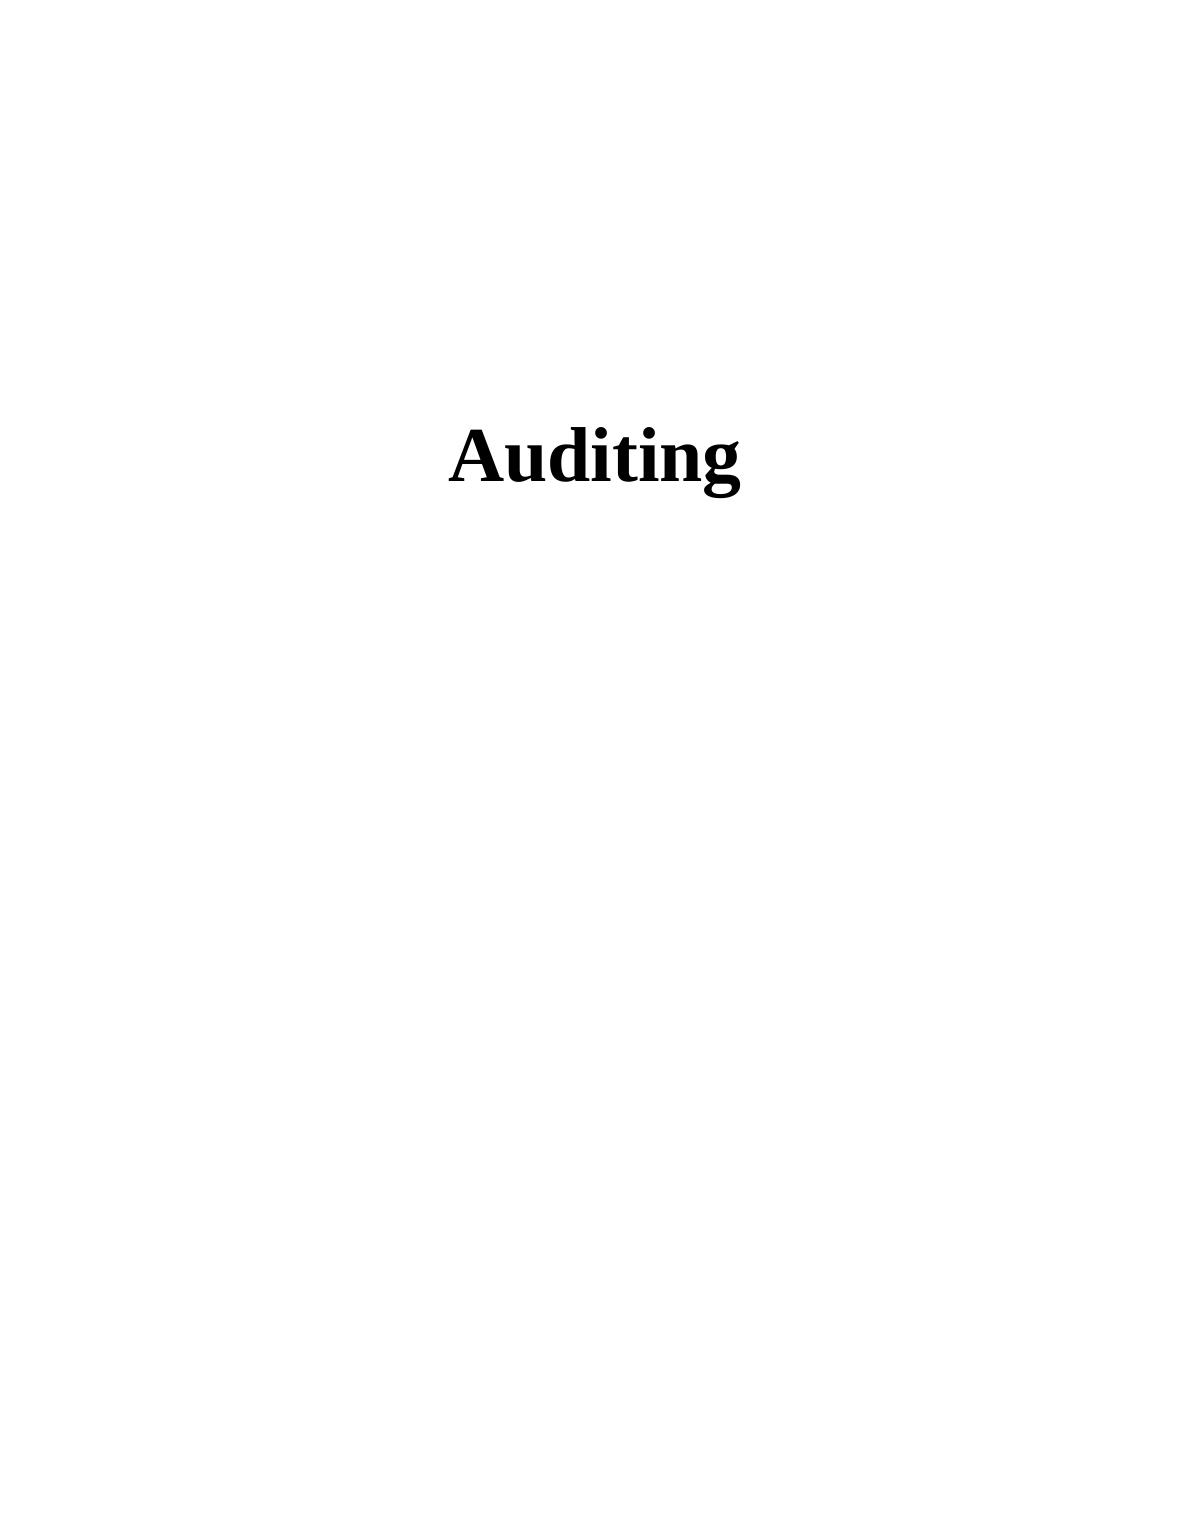 Concept of Auditing - Assignment_1